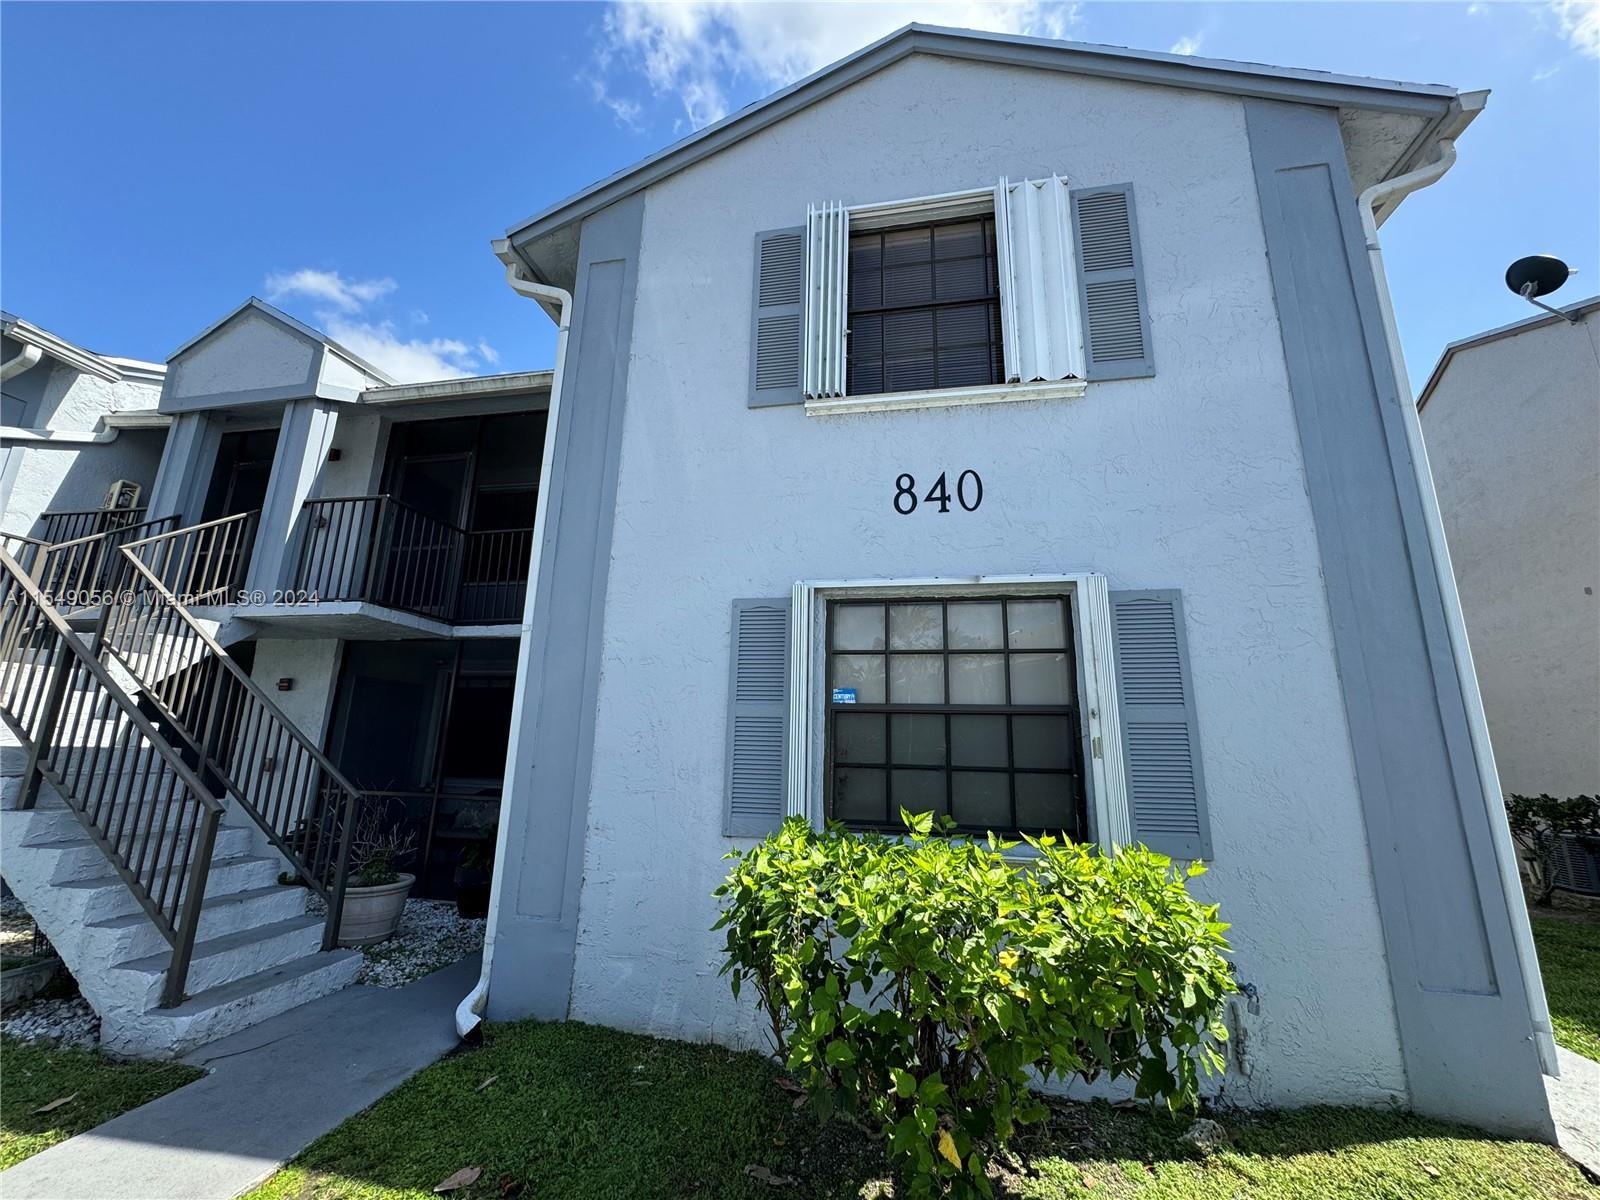 Photo of 840 Independence Dr #840B in Homestead, FL